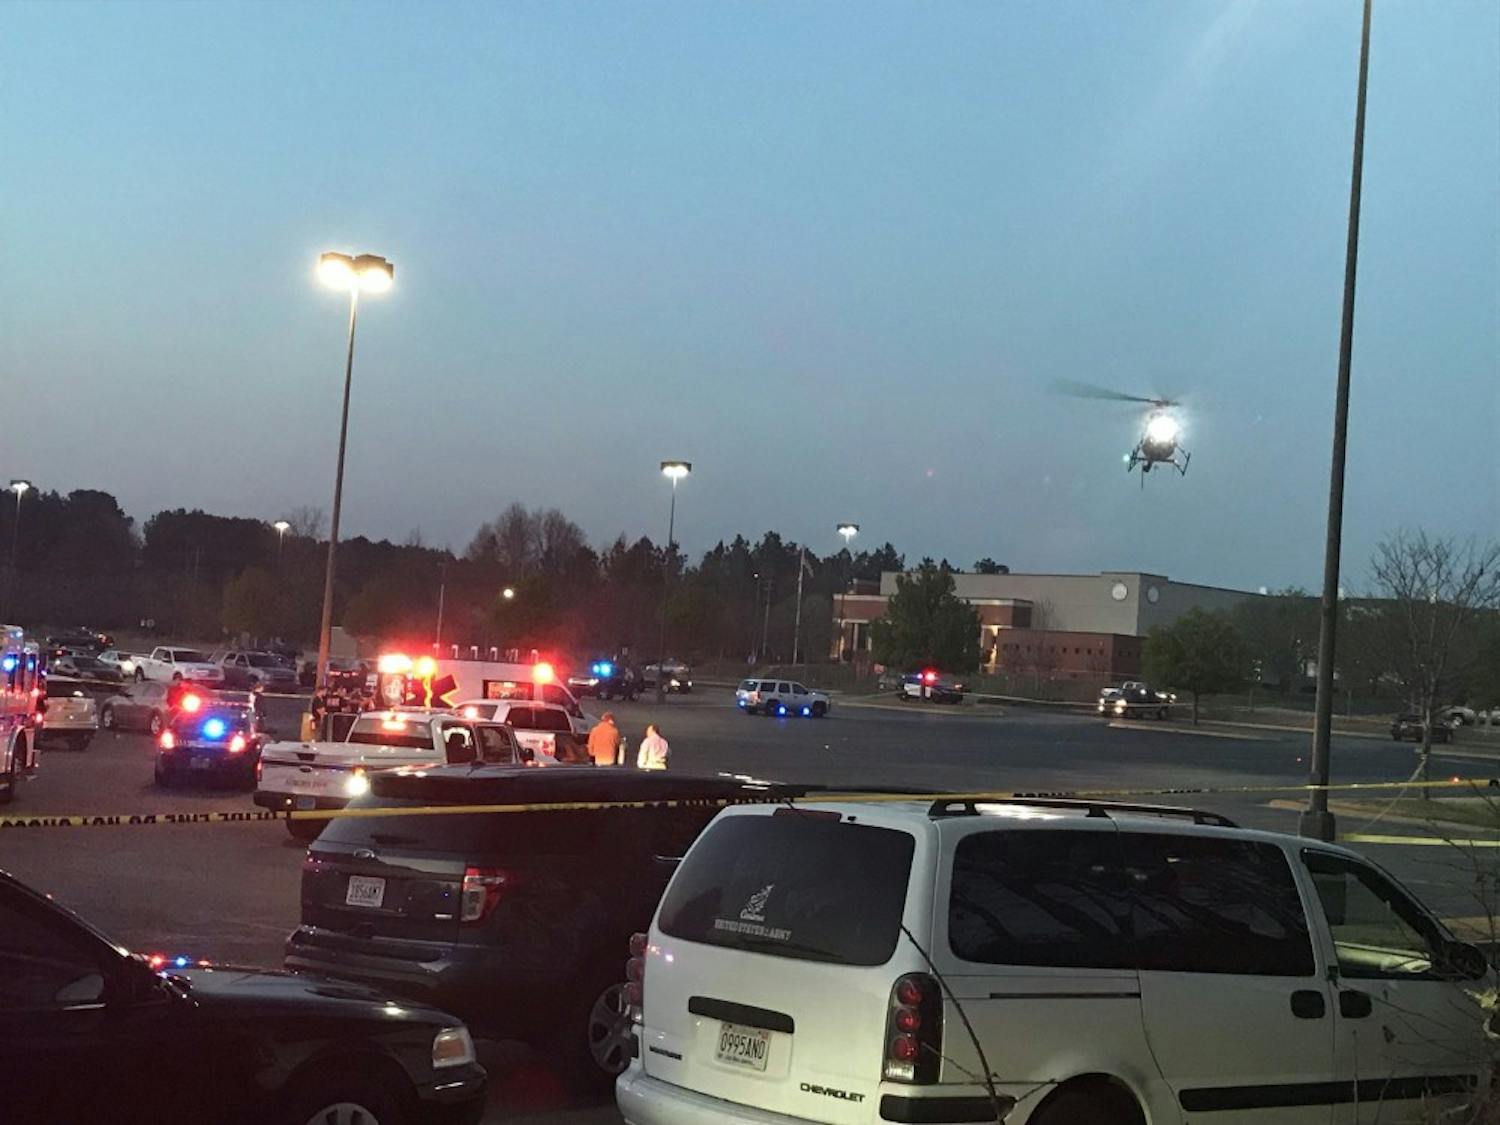 A life-flight helicopter lands on the scene of a reported shooting at Auburn Mall.